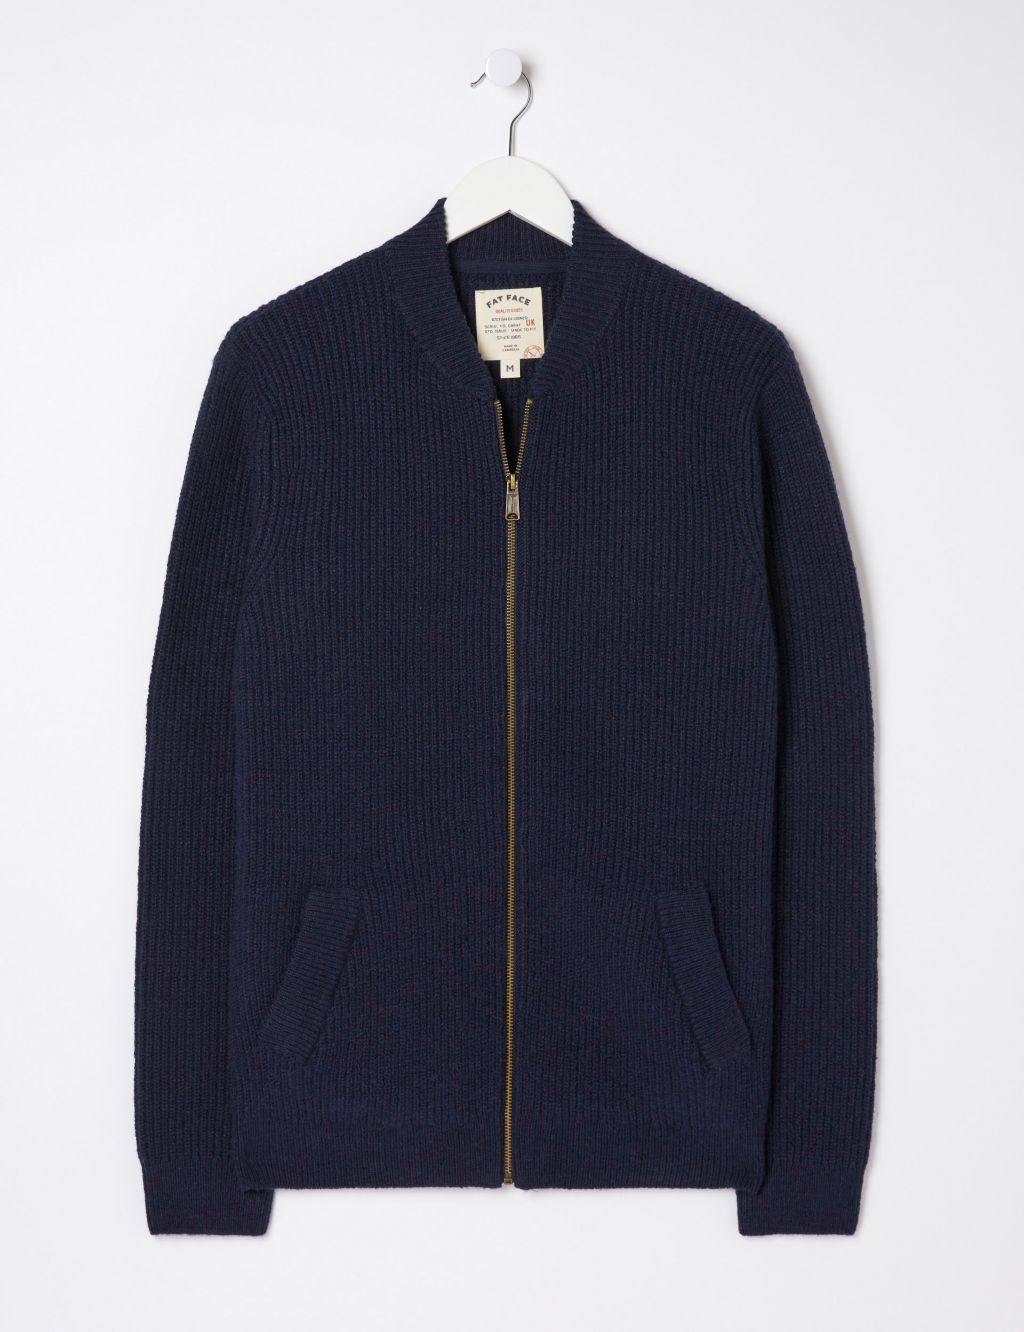 Cotton Rich Ribbed Zip Up Cardigan image 2